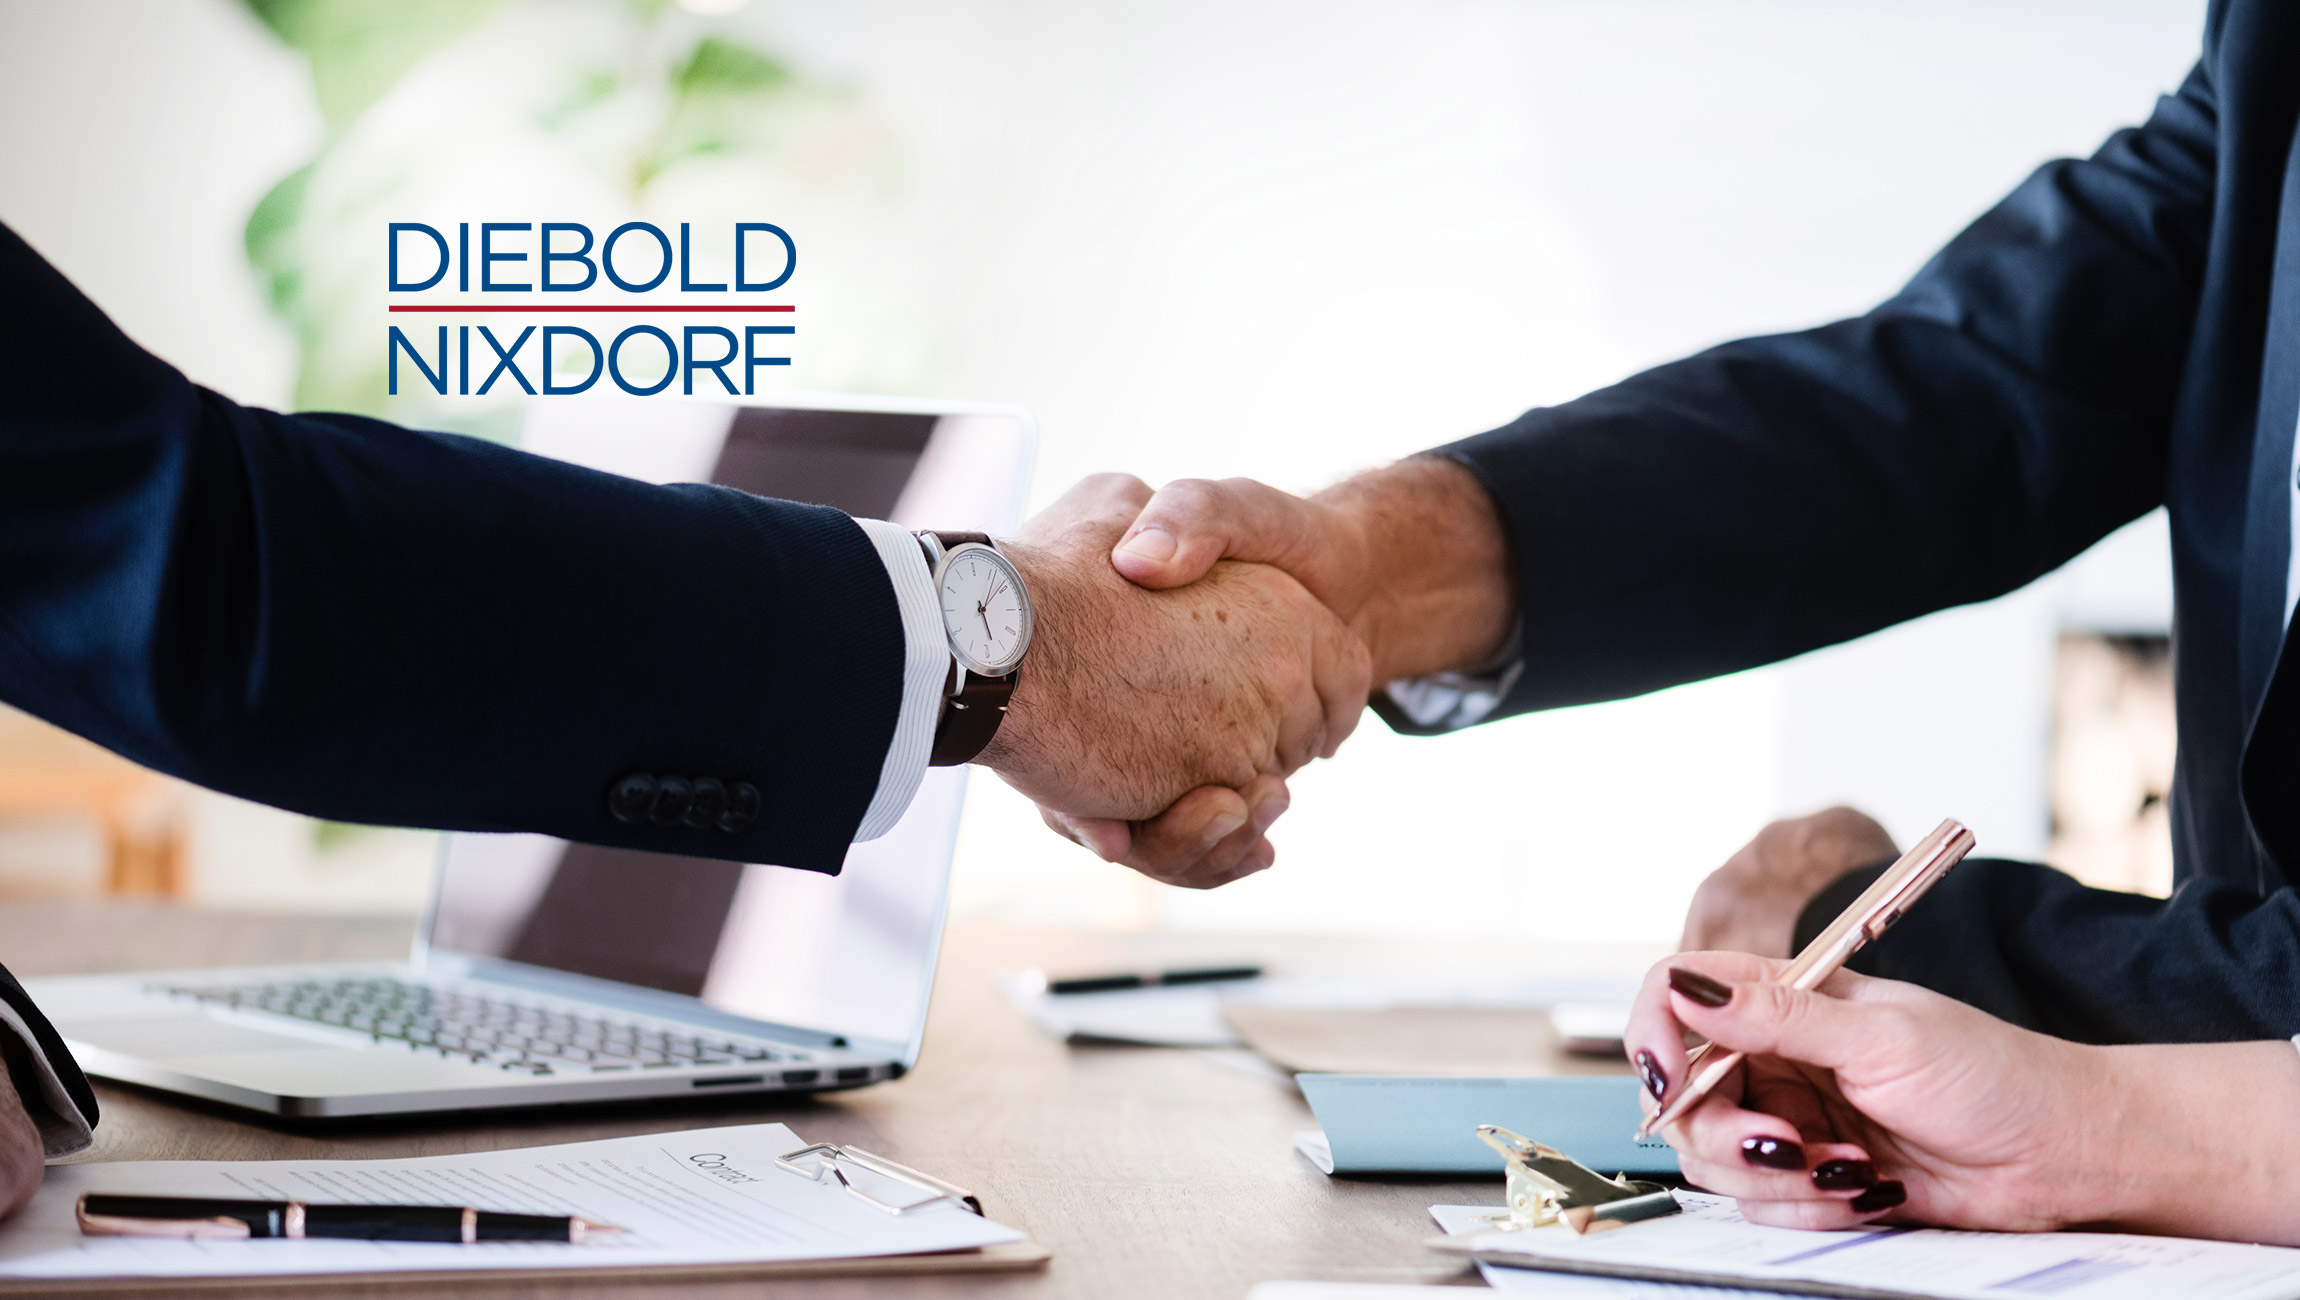 Diebold Nixdorf Partners With Actv8me To Introduce A New Consumer Engagement And Transactional Platform